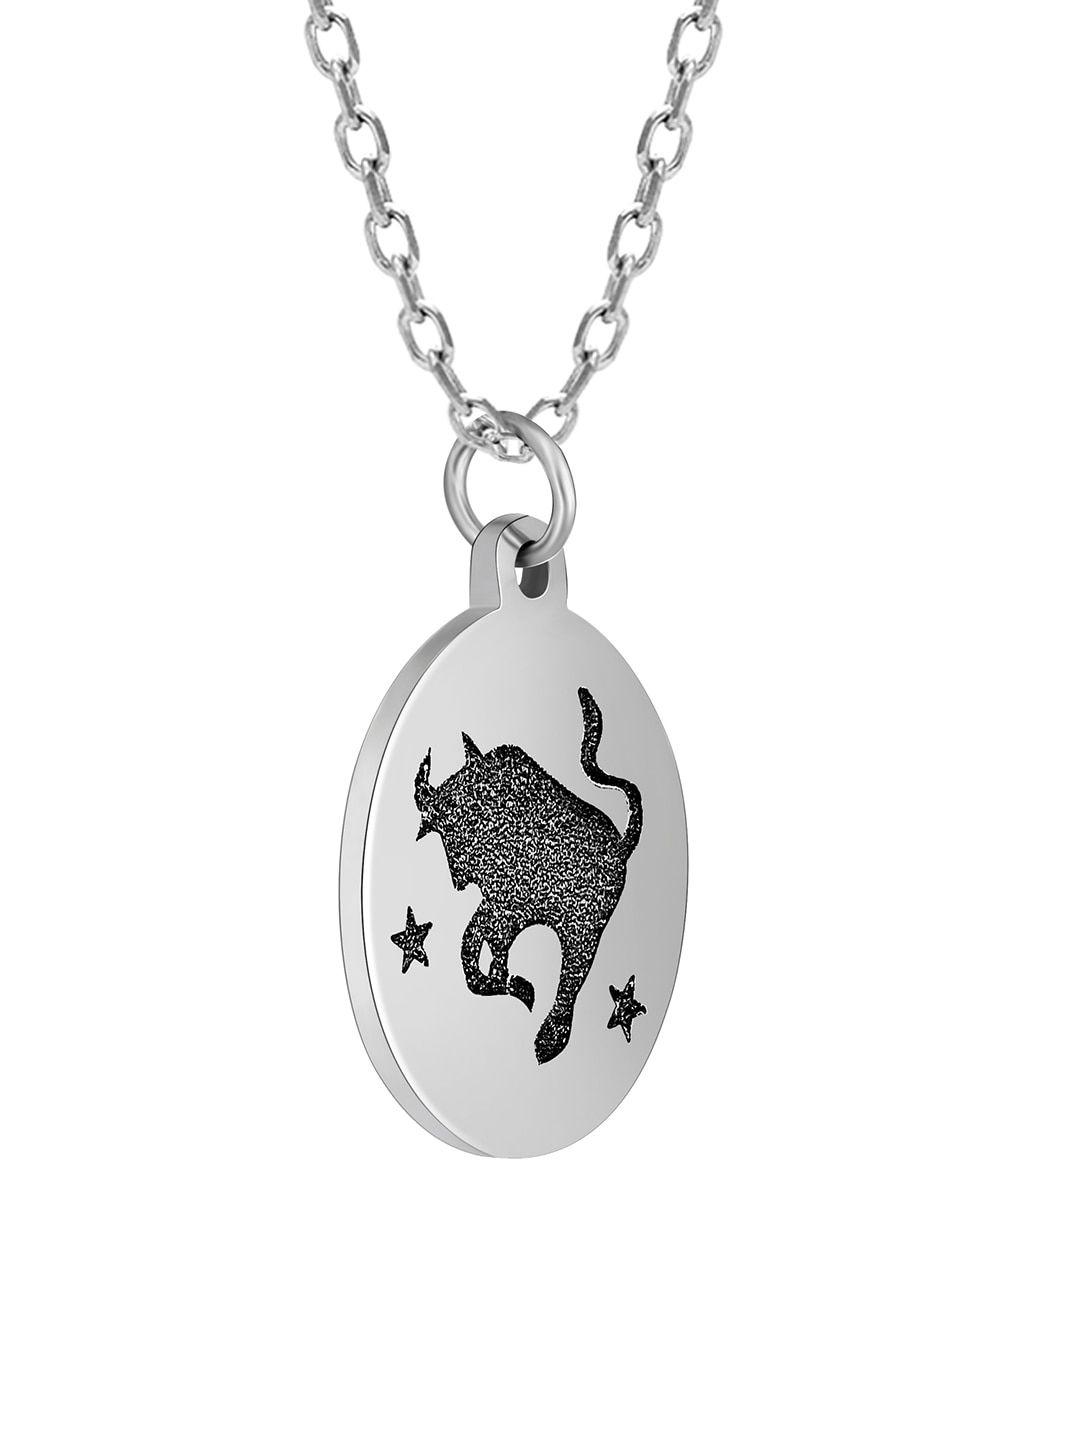 giva 925 sterling silver rhodium-plated silver-toned & black taurus zodiac charm pendant with chain